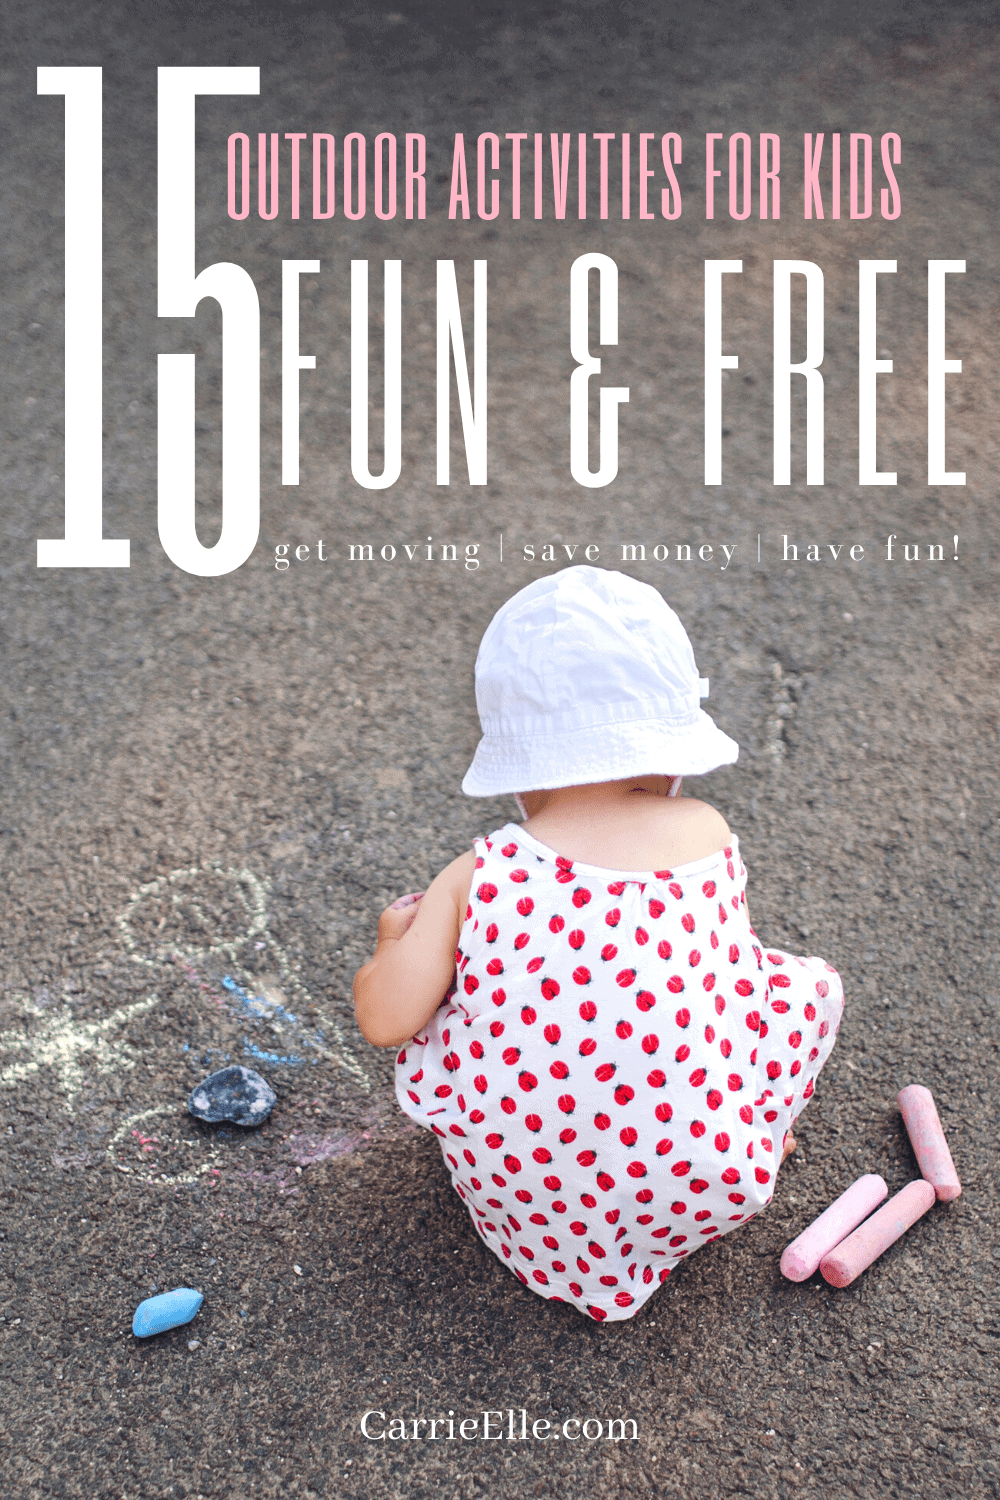 15 Fun and Free Outdoor Activities for Kids